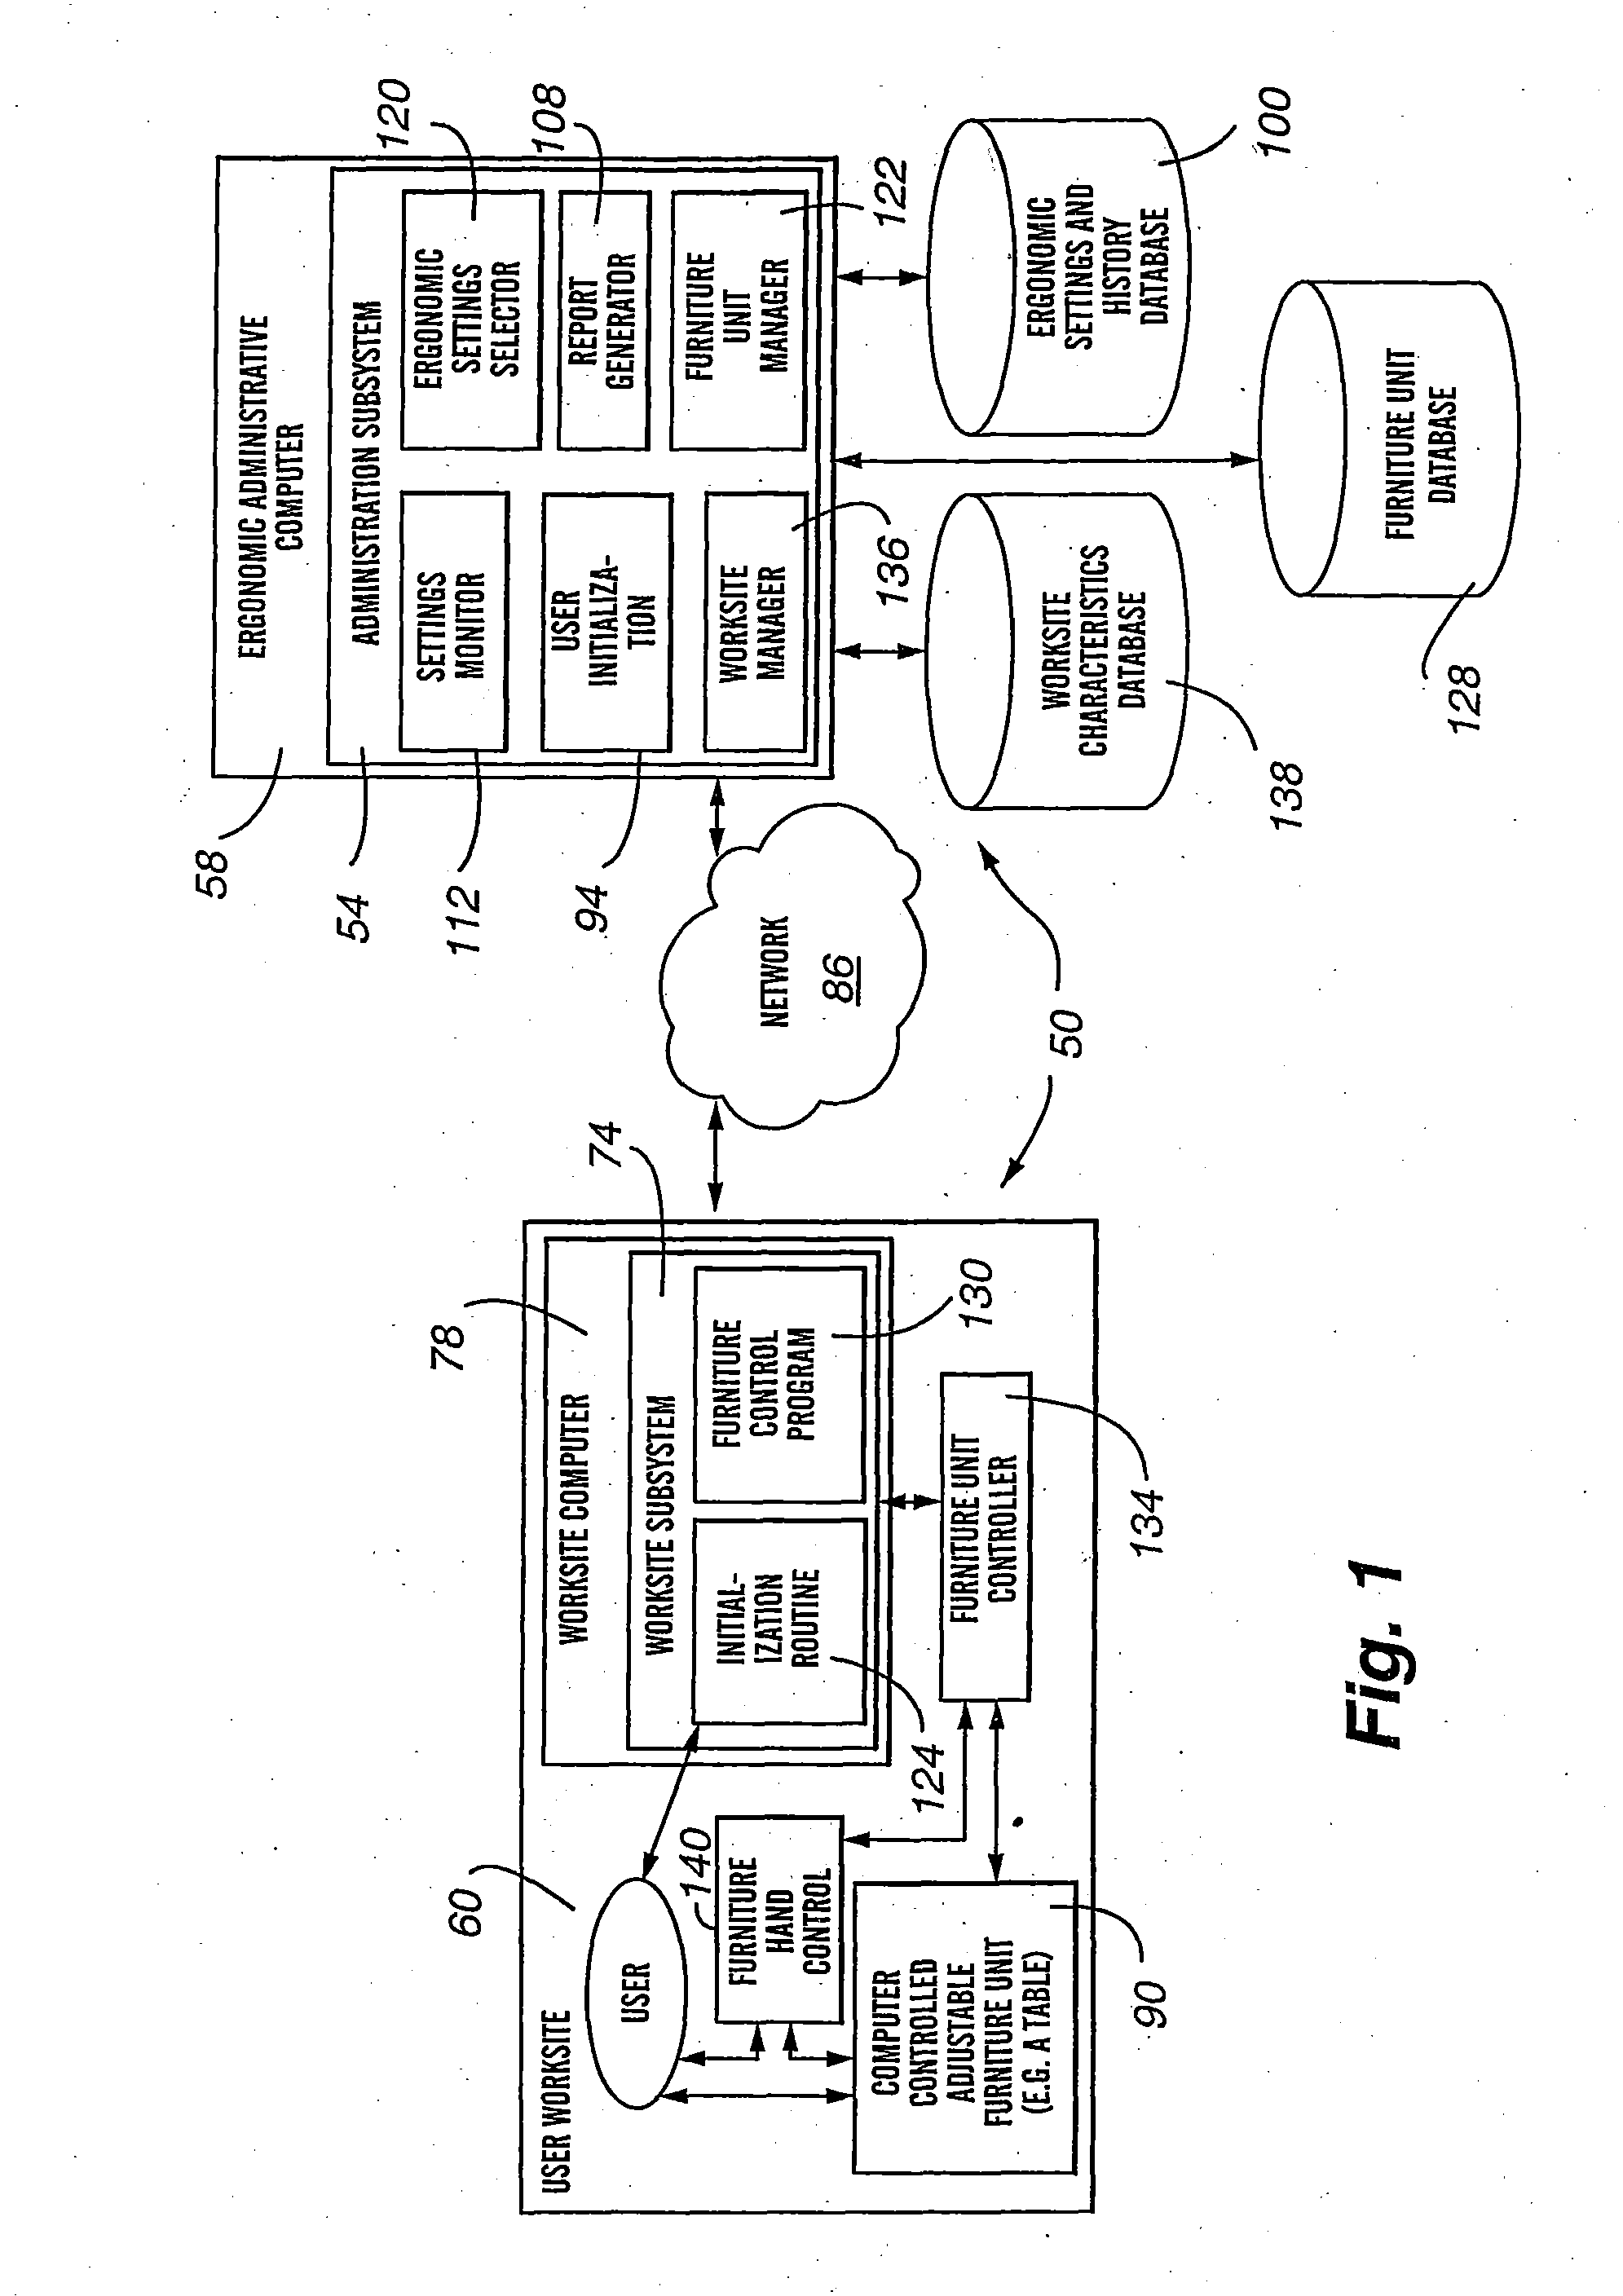 Method and system for controlling ergonomic settings at a worksite